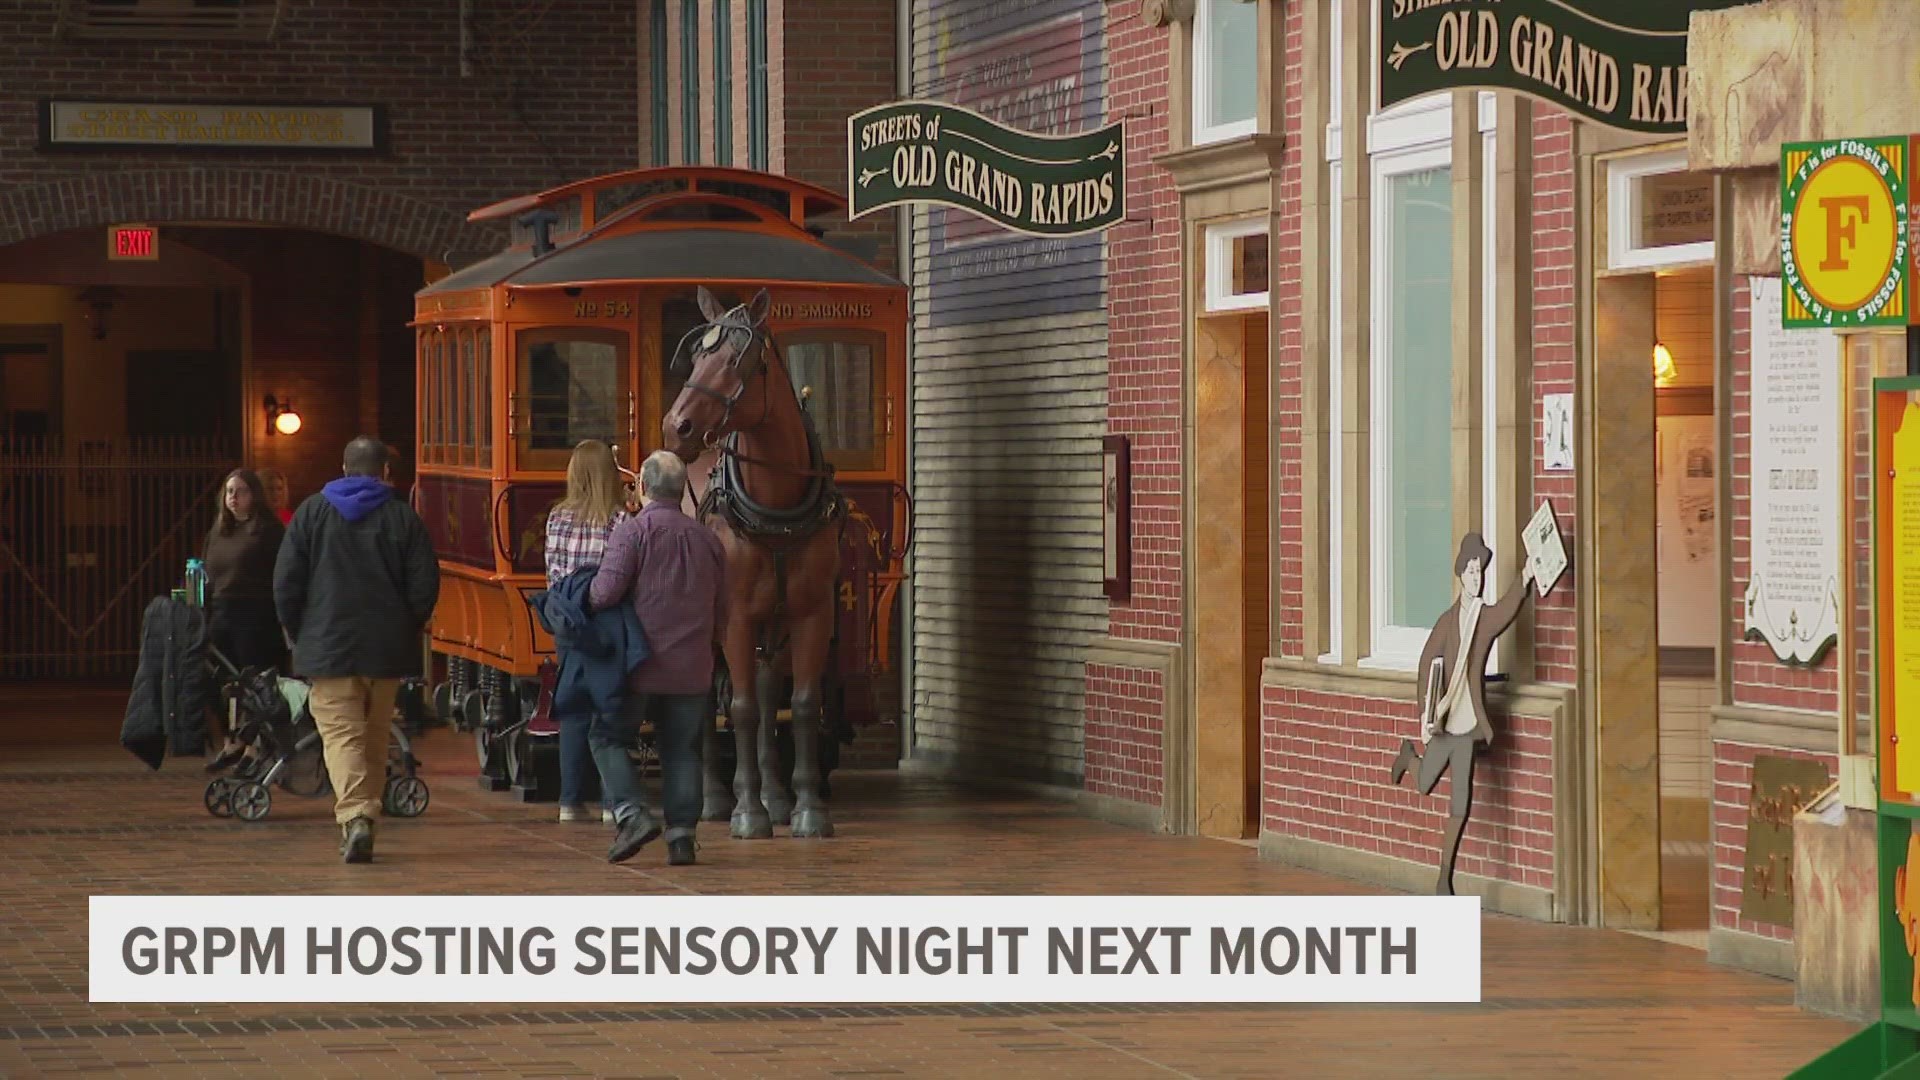 The Grand Rapids Public Museum is partnering with Hope Network next month to create a sensory friendly night at the museum.